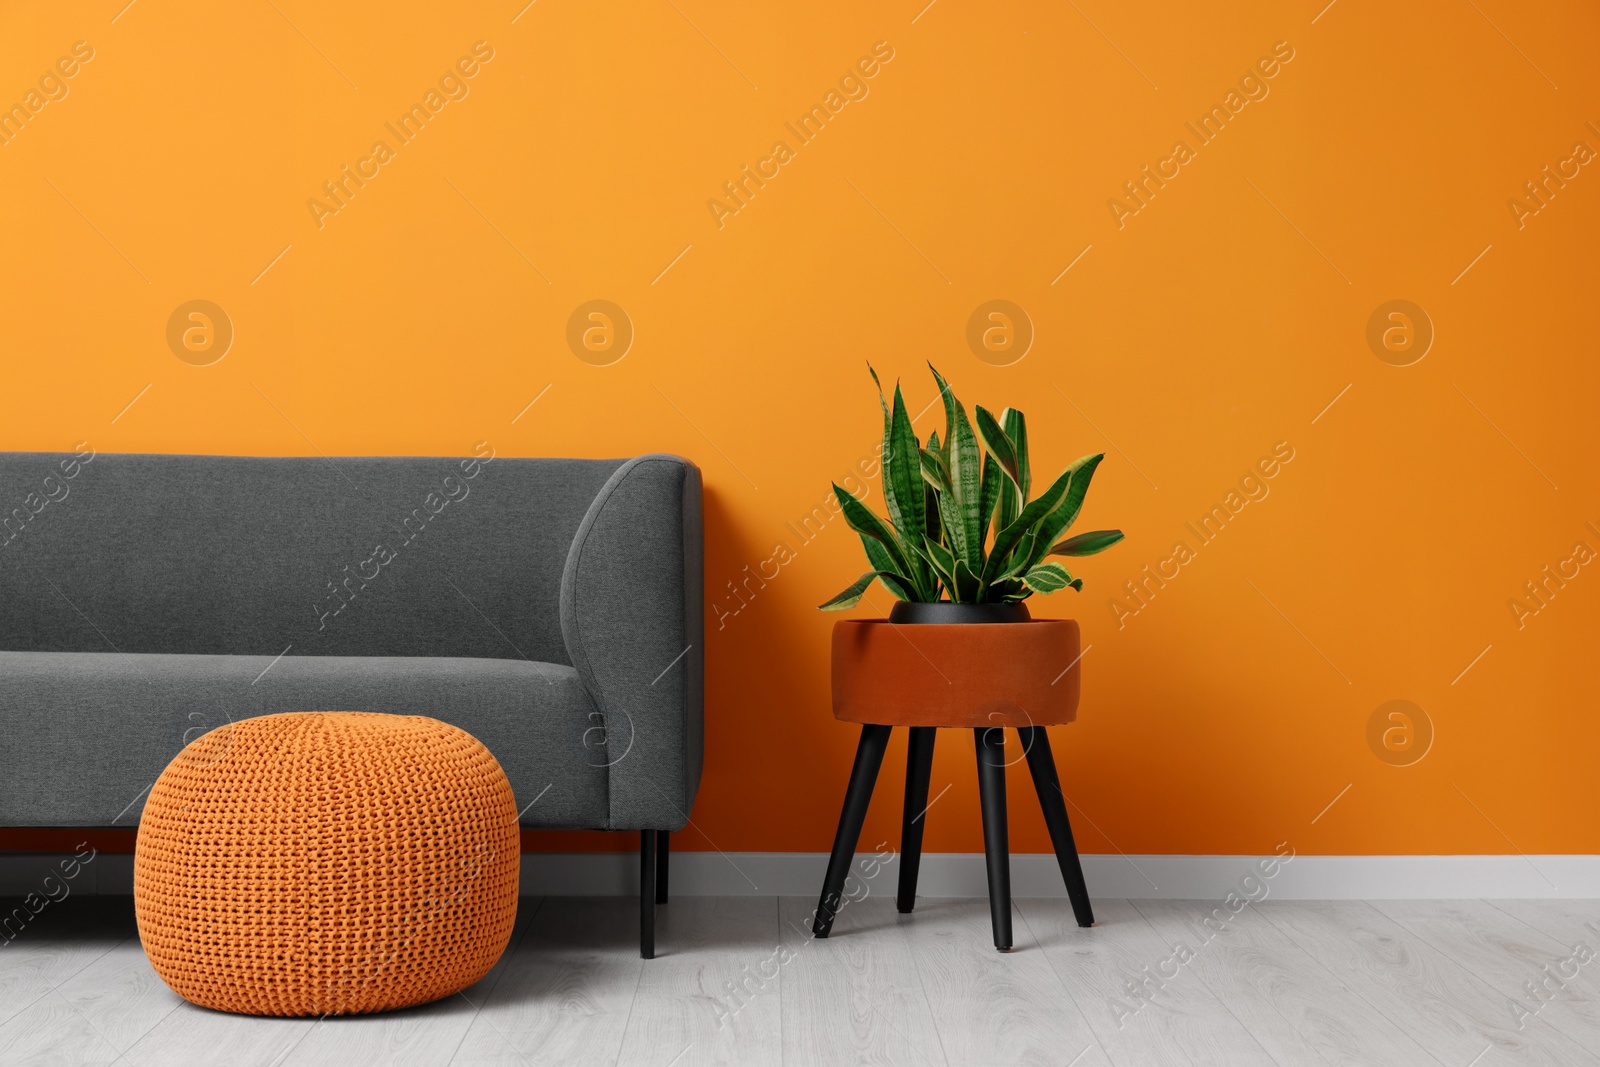 Photo of Stylish sofa and potted plant near orange wall, space for text. Interior design